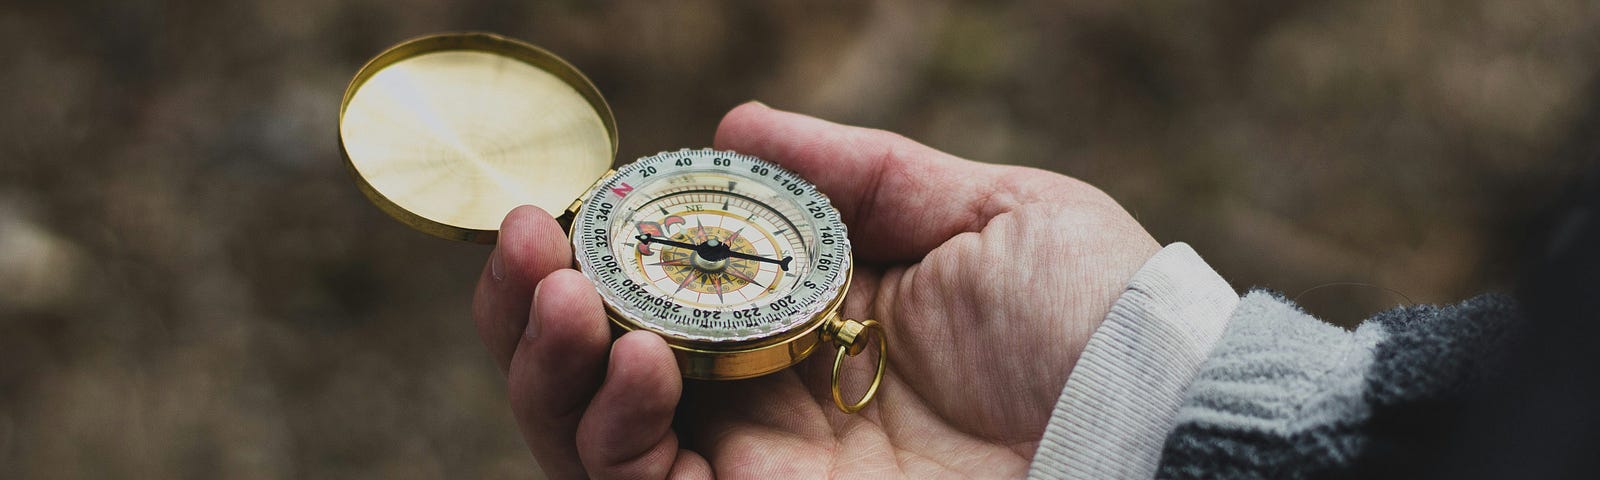 A person’s hand holds an old, gold compass, against a backdrop of autumn leaves and layered sleeves.